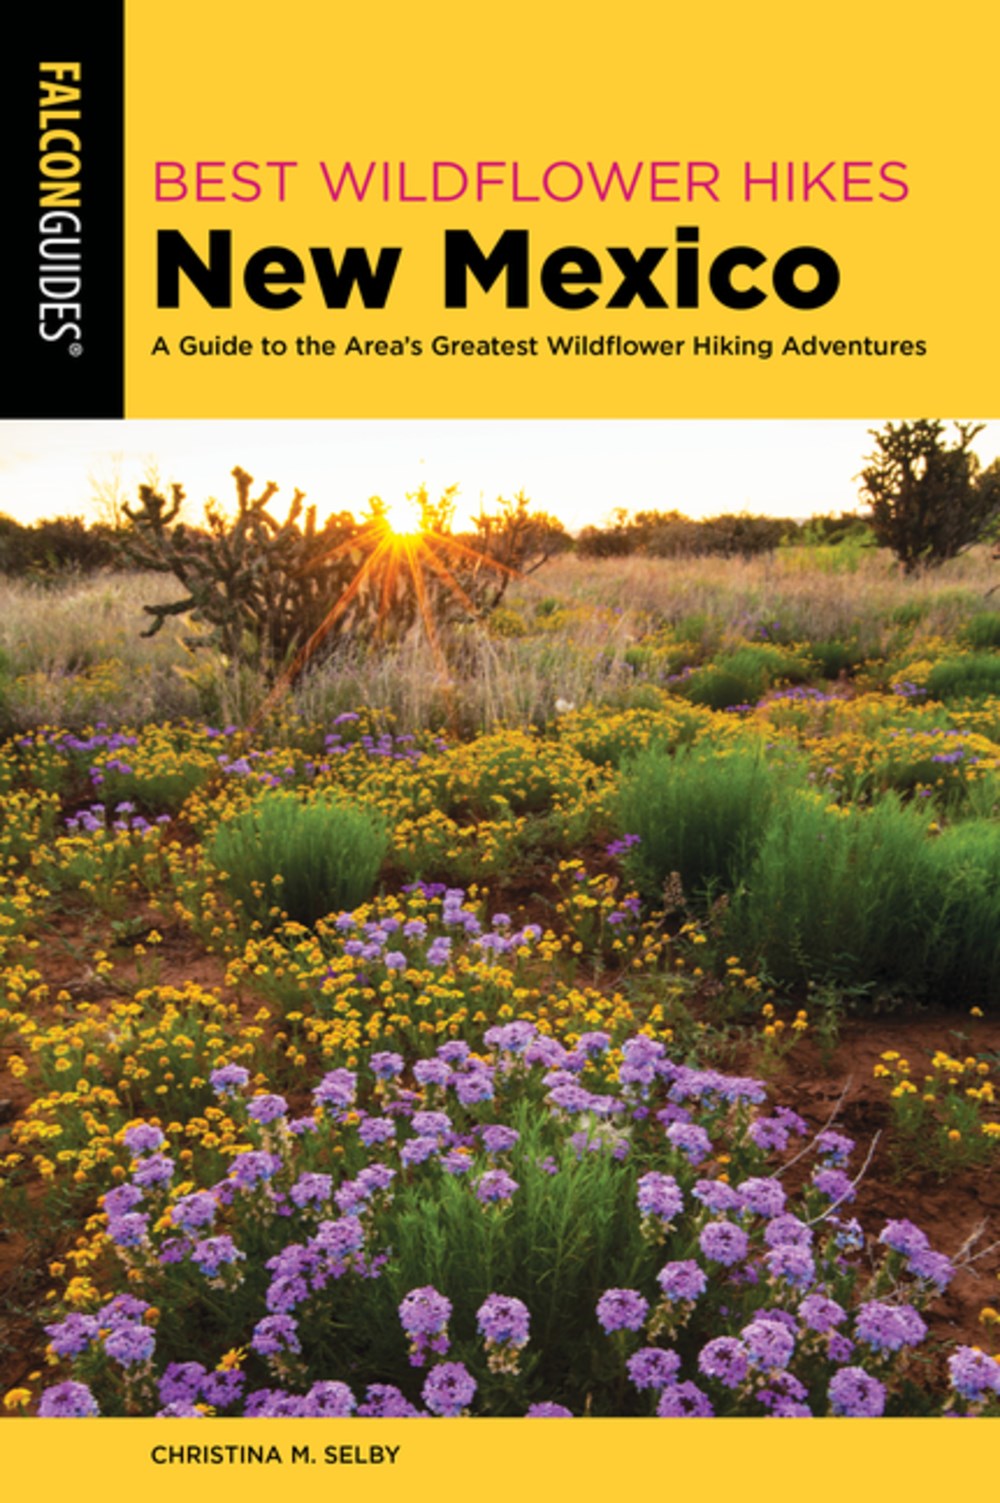 Best Wildflower Hikes New Mexico: A Guide to the Area's Greatest Wildflower Hiking Adventures